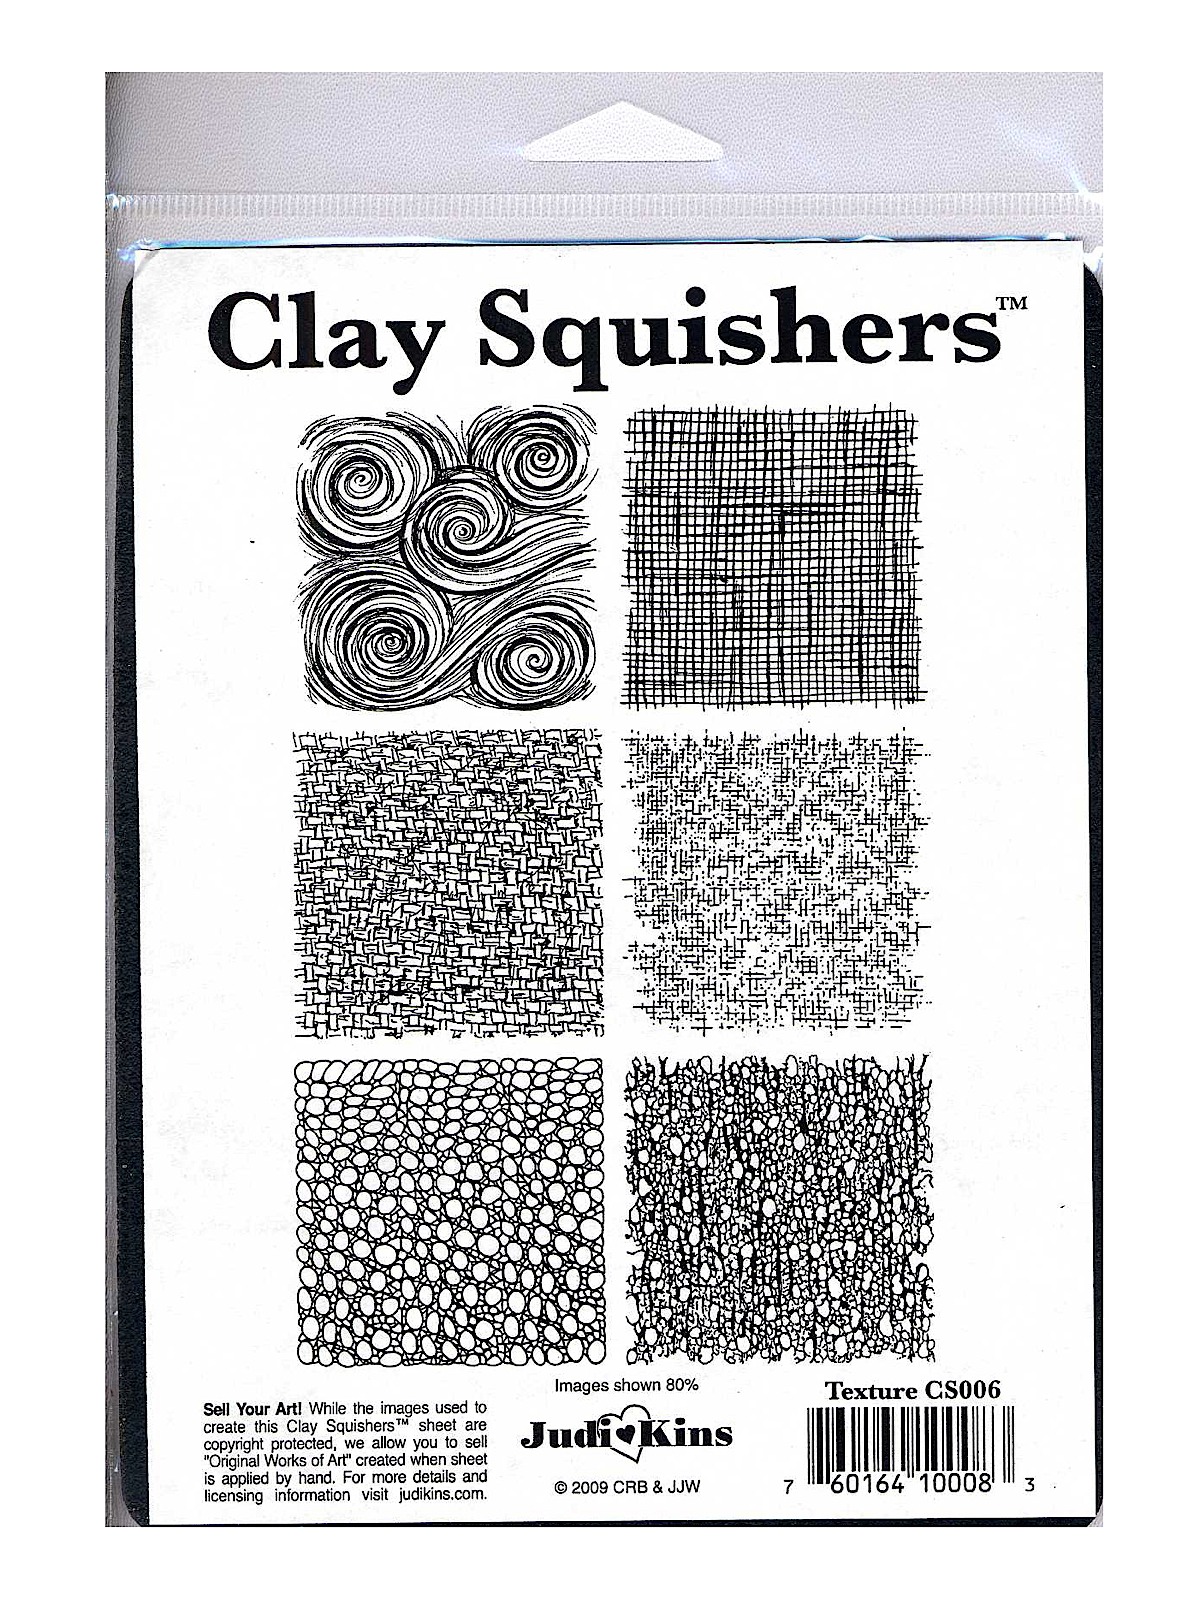 Clay Squishers Textures